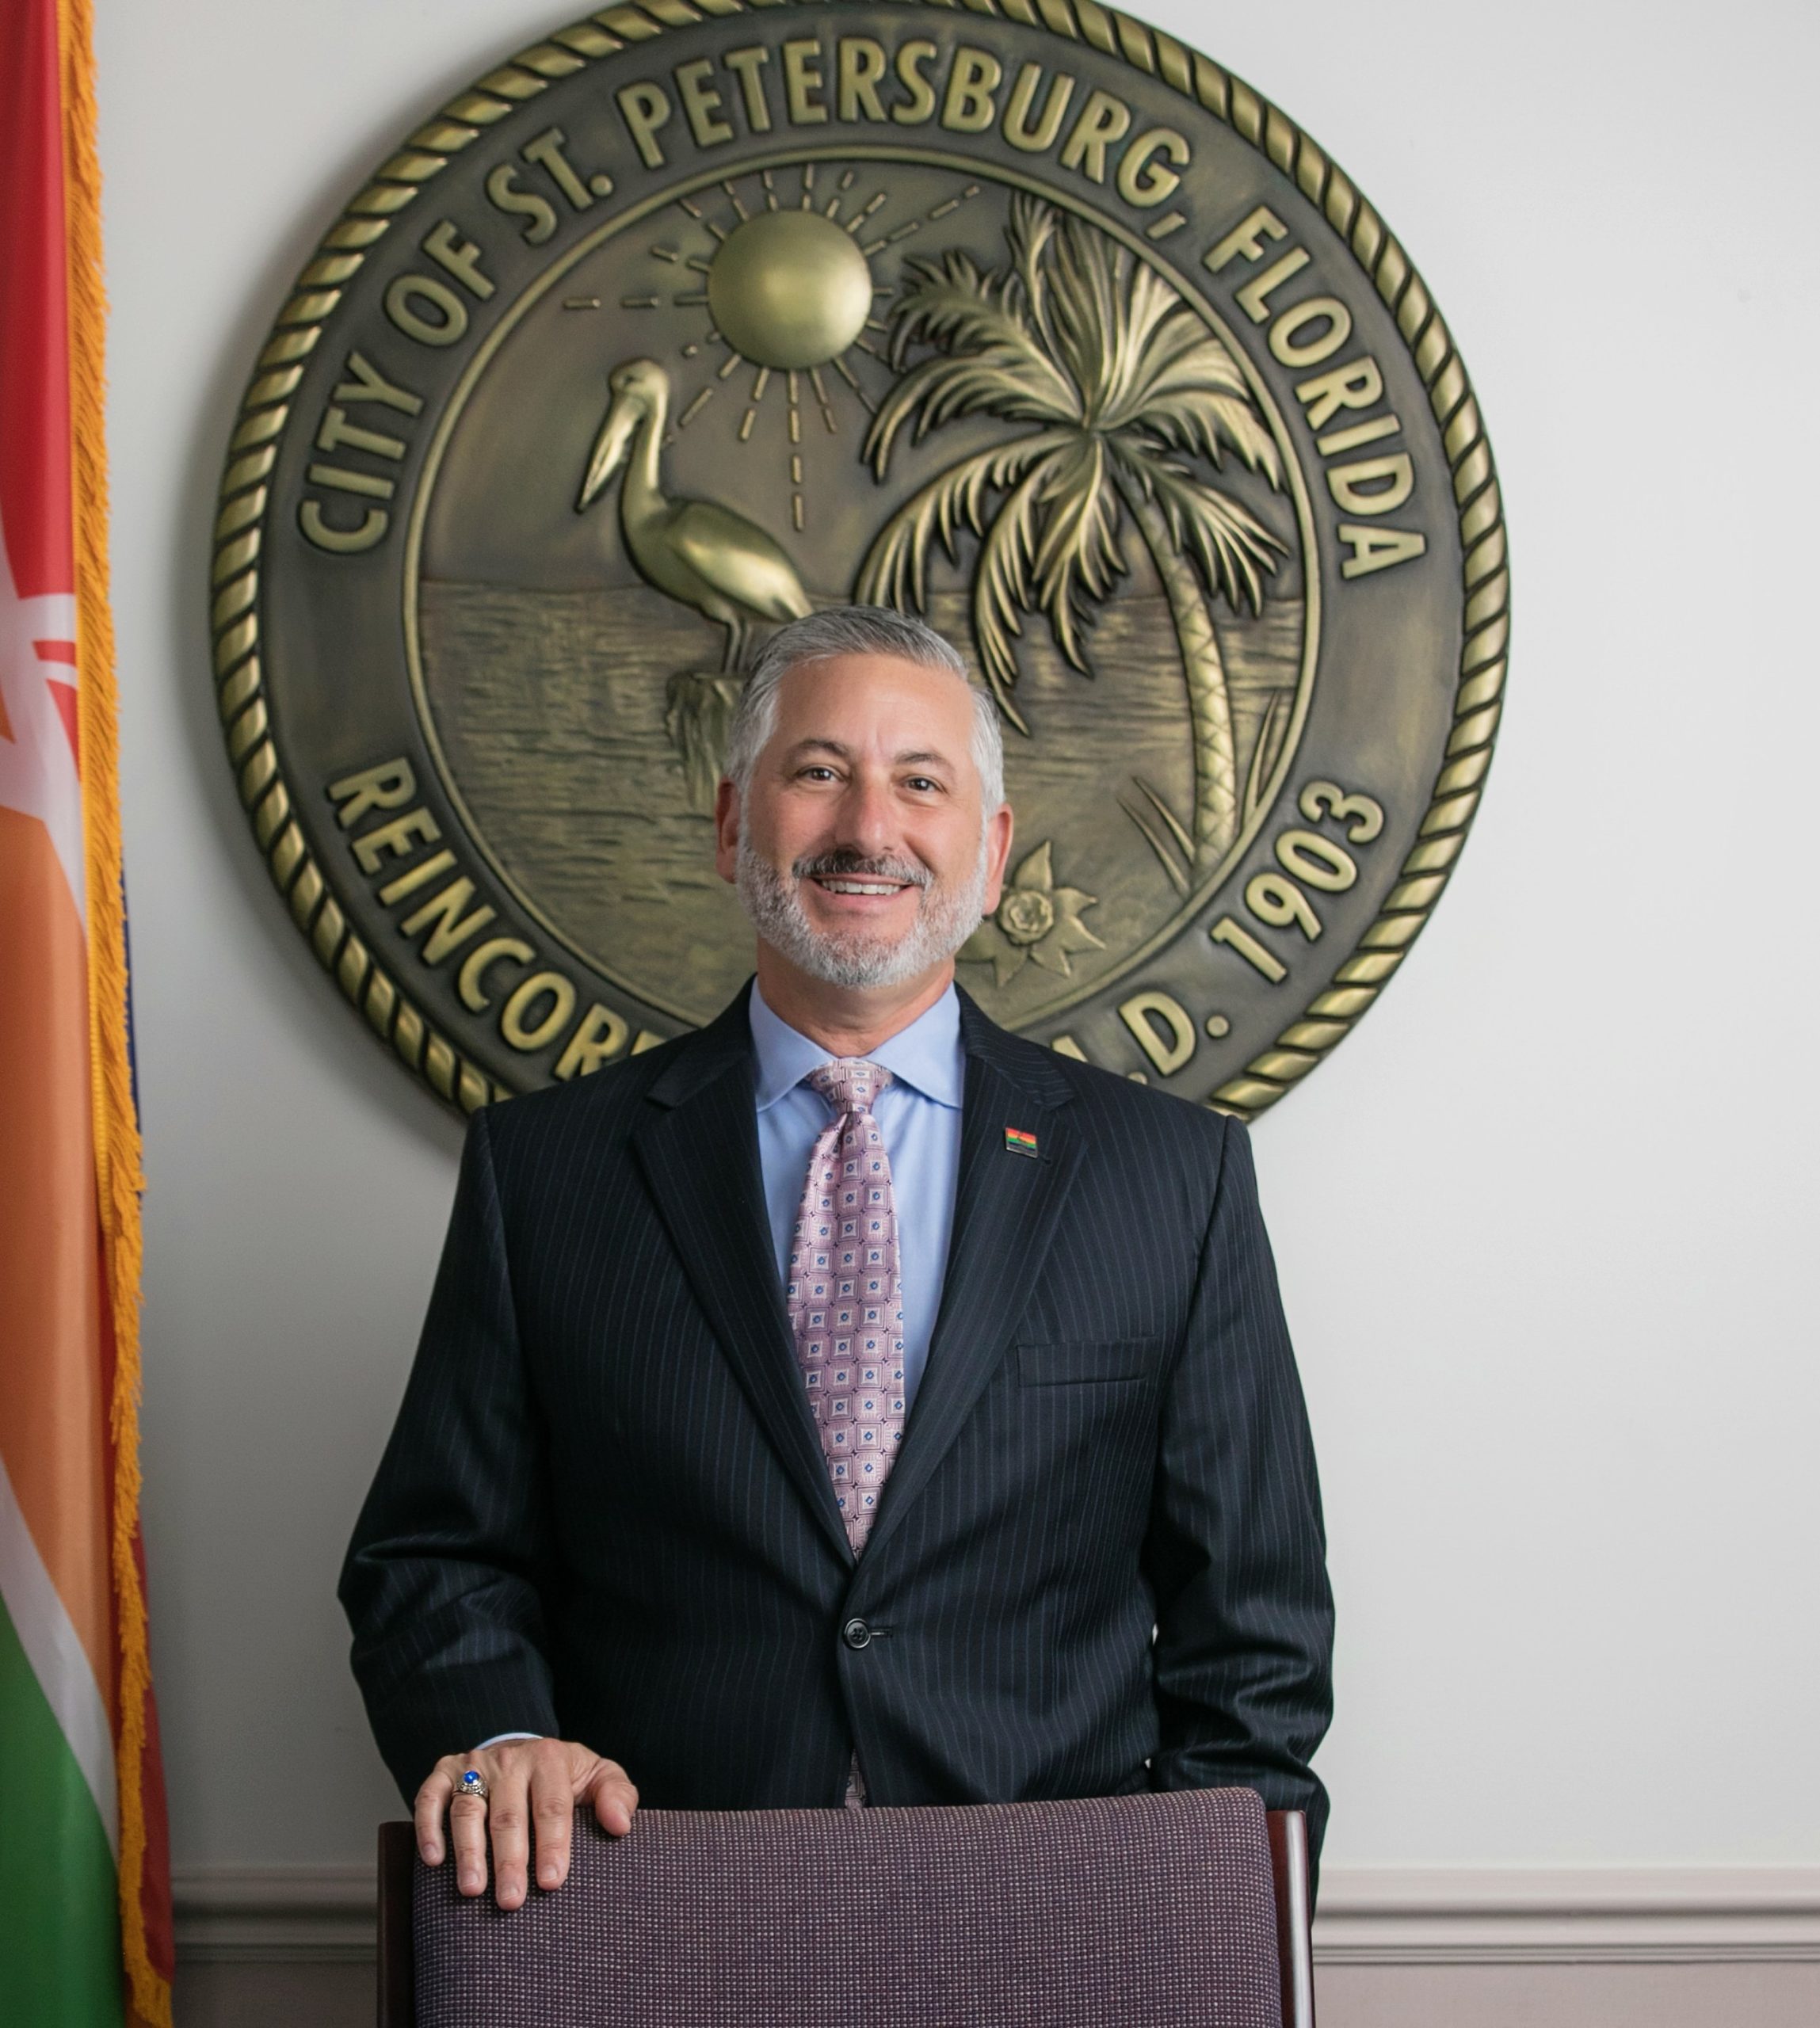 From Public Servant to Private Citizen: A Reflective Conversation with Rick Kriseman